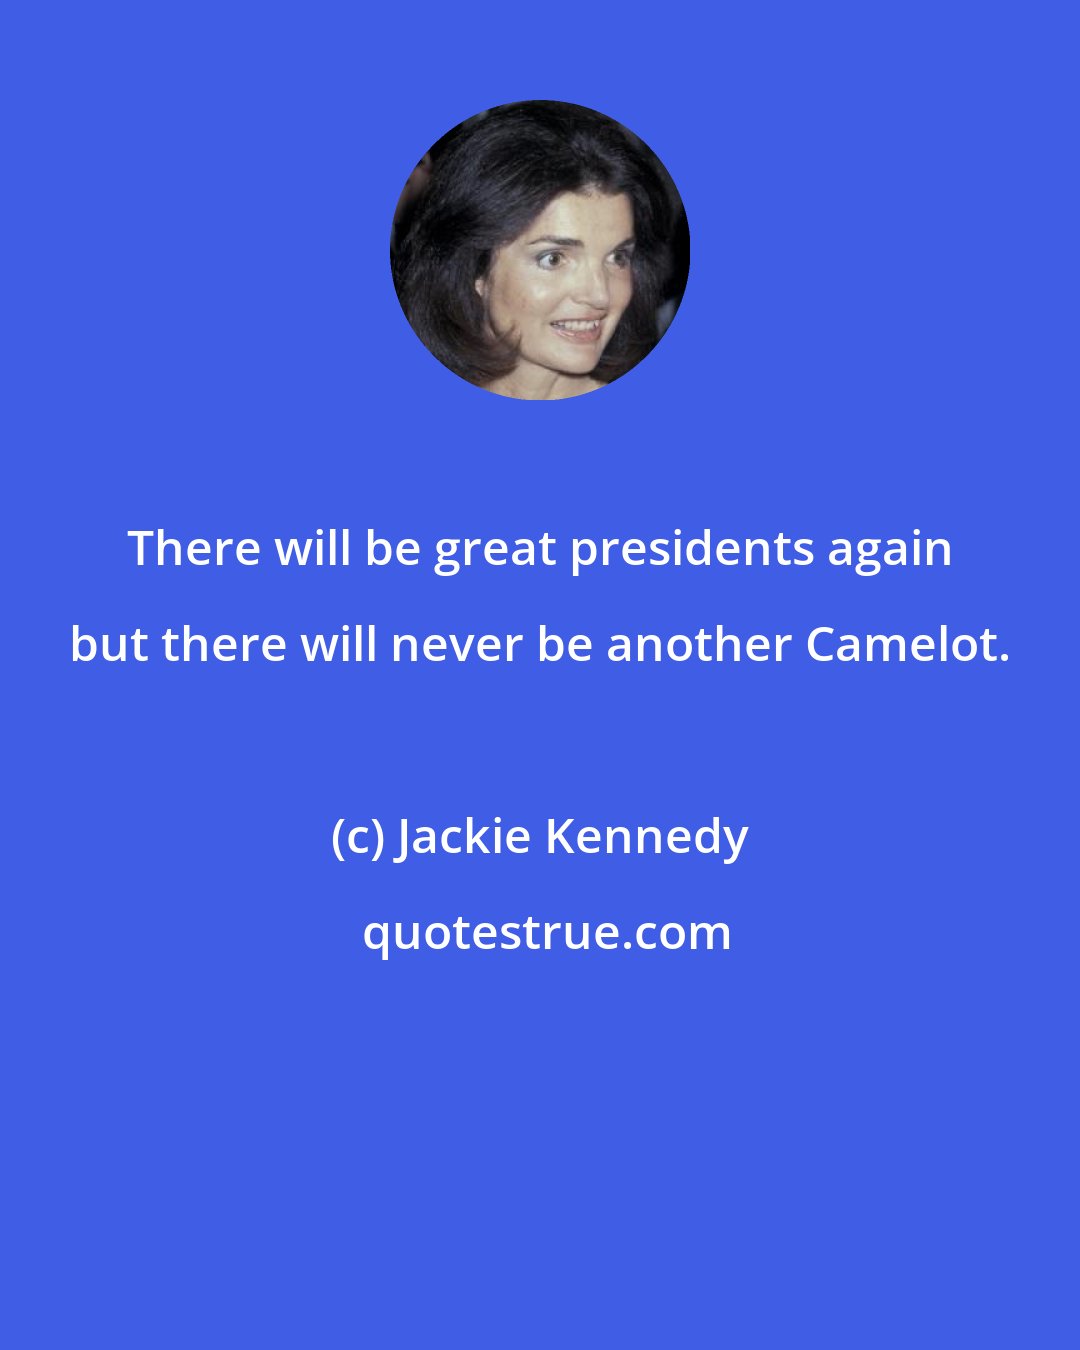 Jackie Kennedy: There will be great presidents again but there will never be another Camelot.